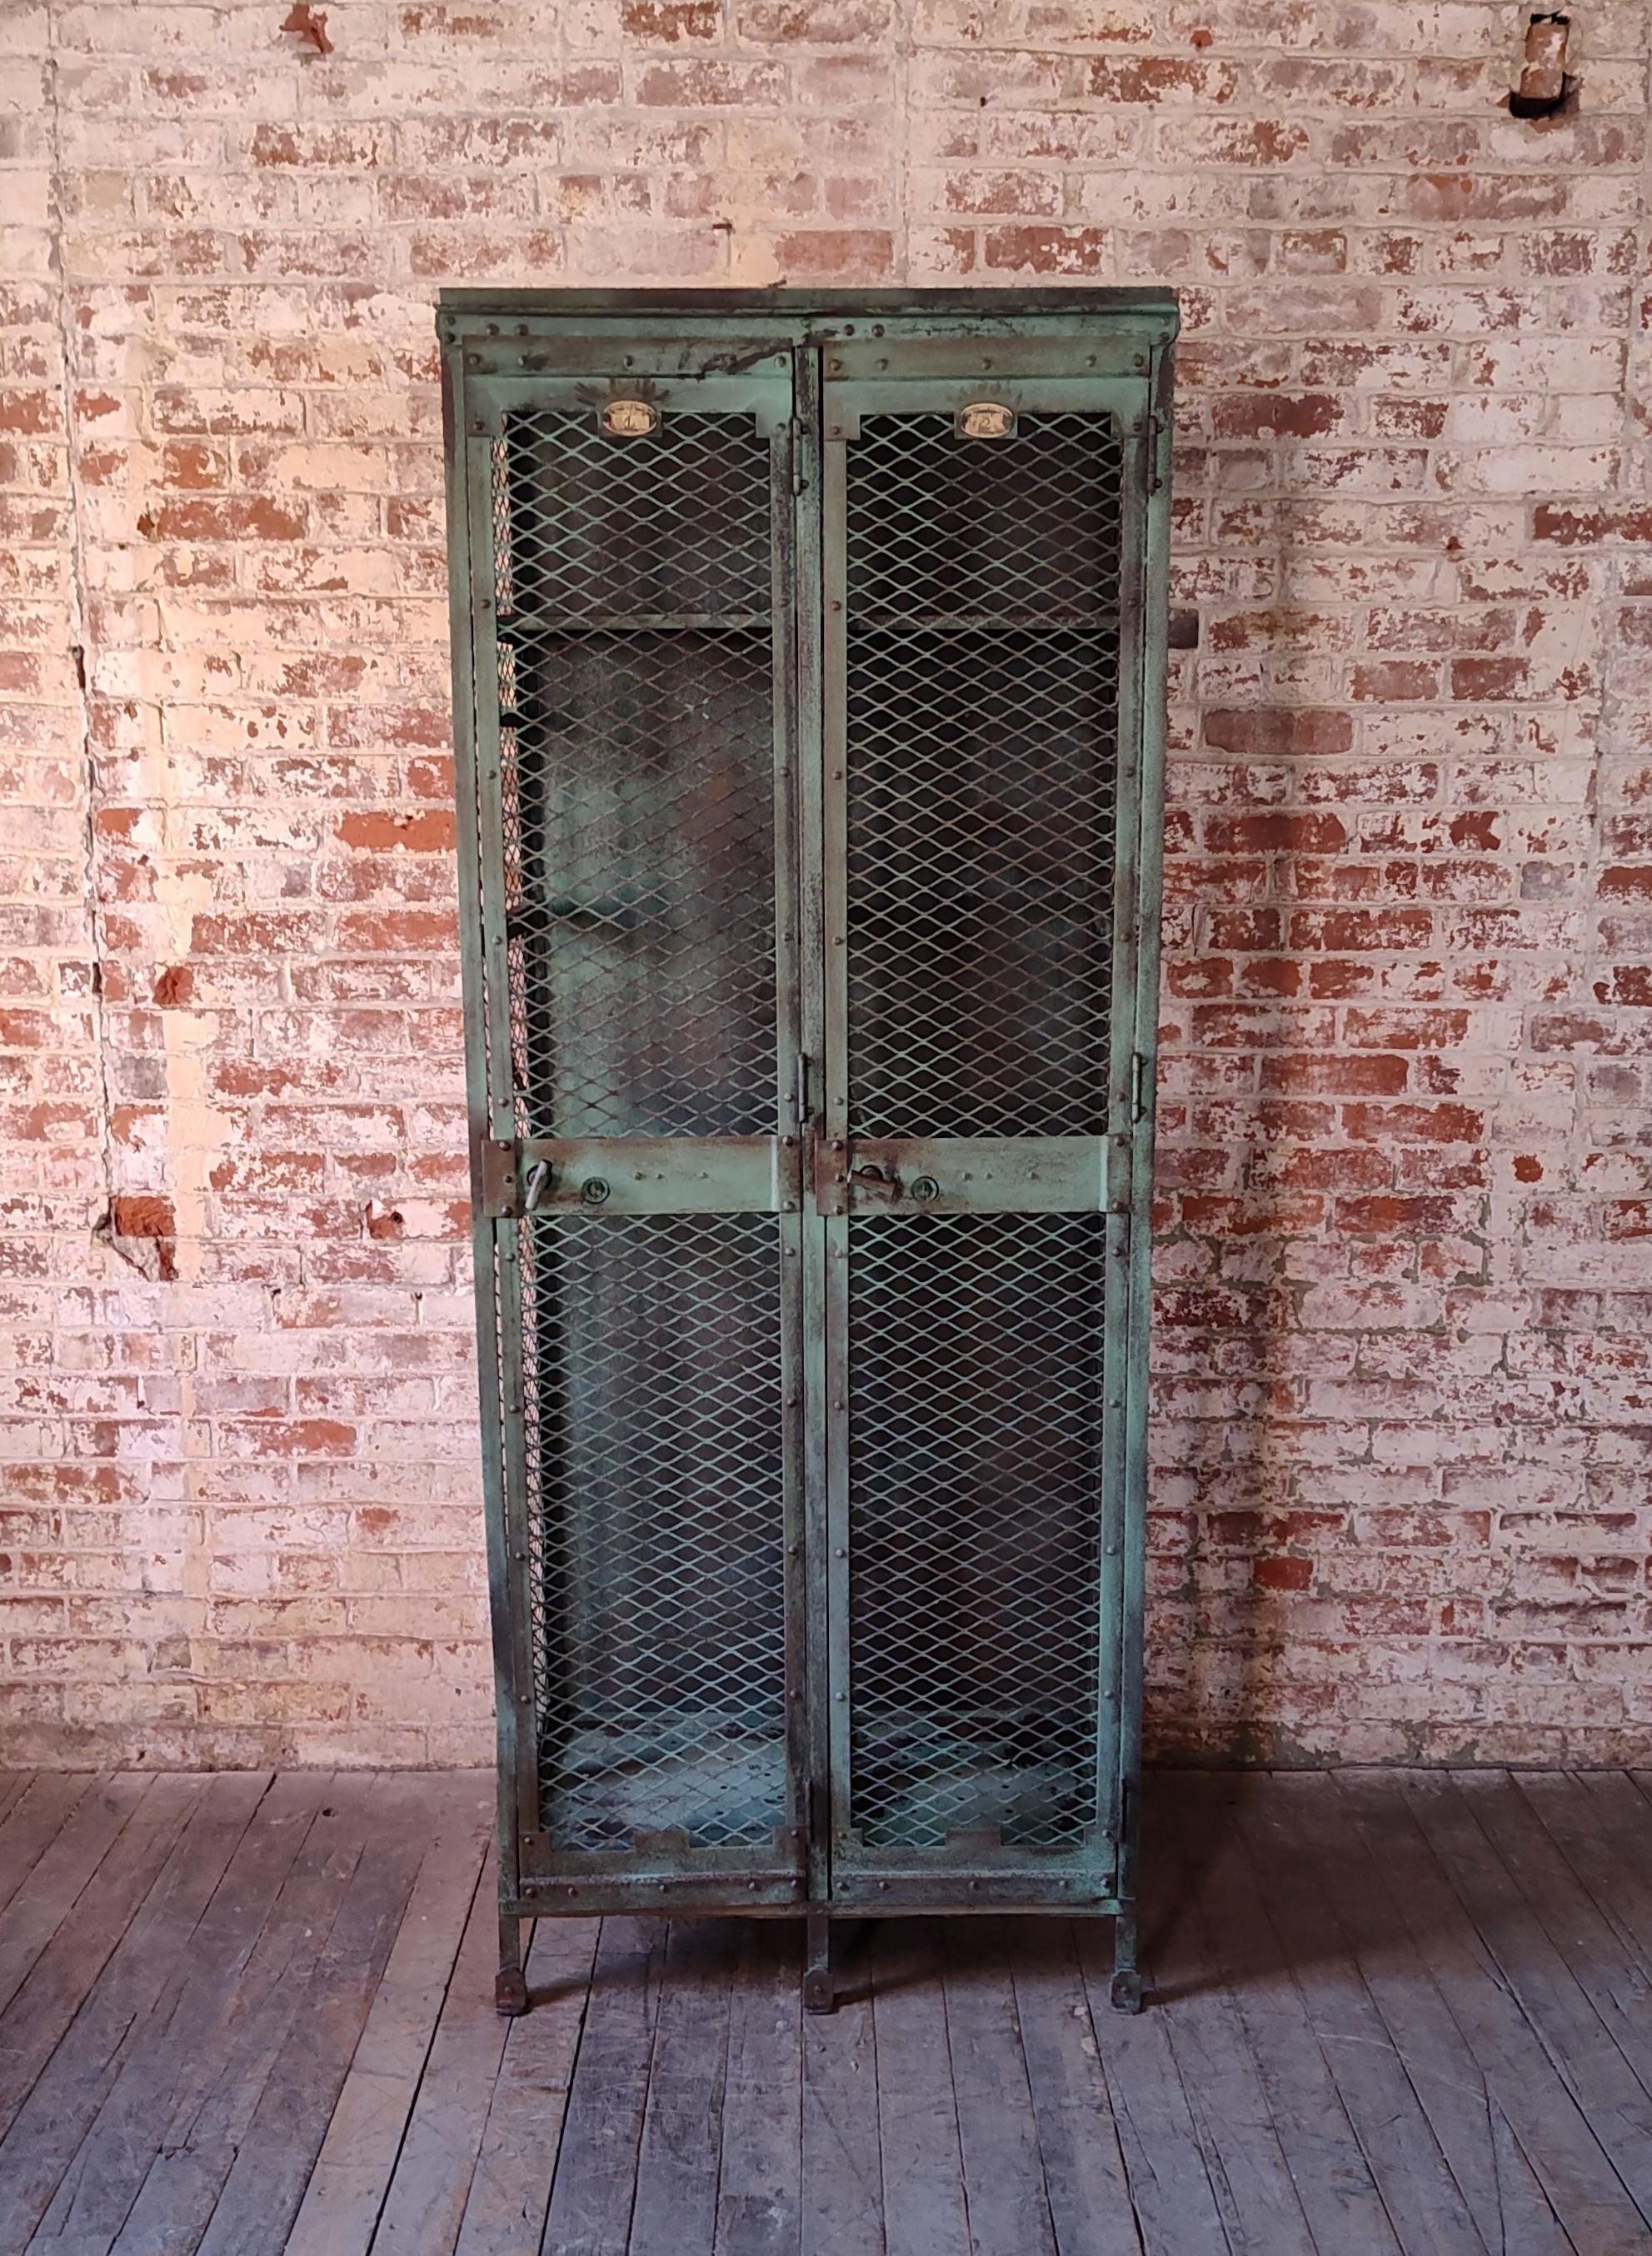 Steel Mesh Antique Factory Lockers

Overall Dimensions: 22